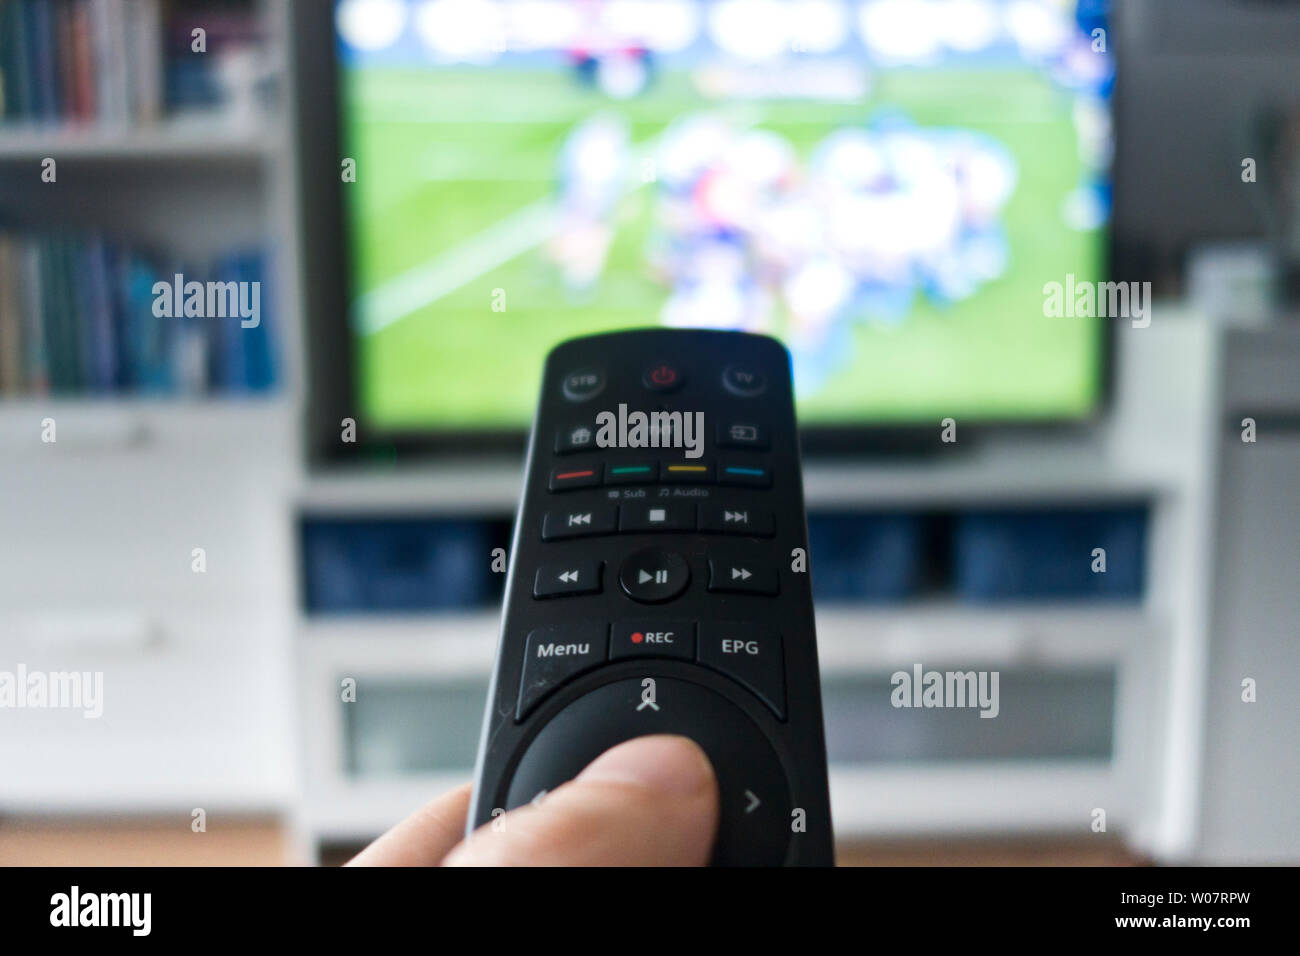 man holding a remote control pointed at the TV screen showing some sport event Stock Photo